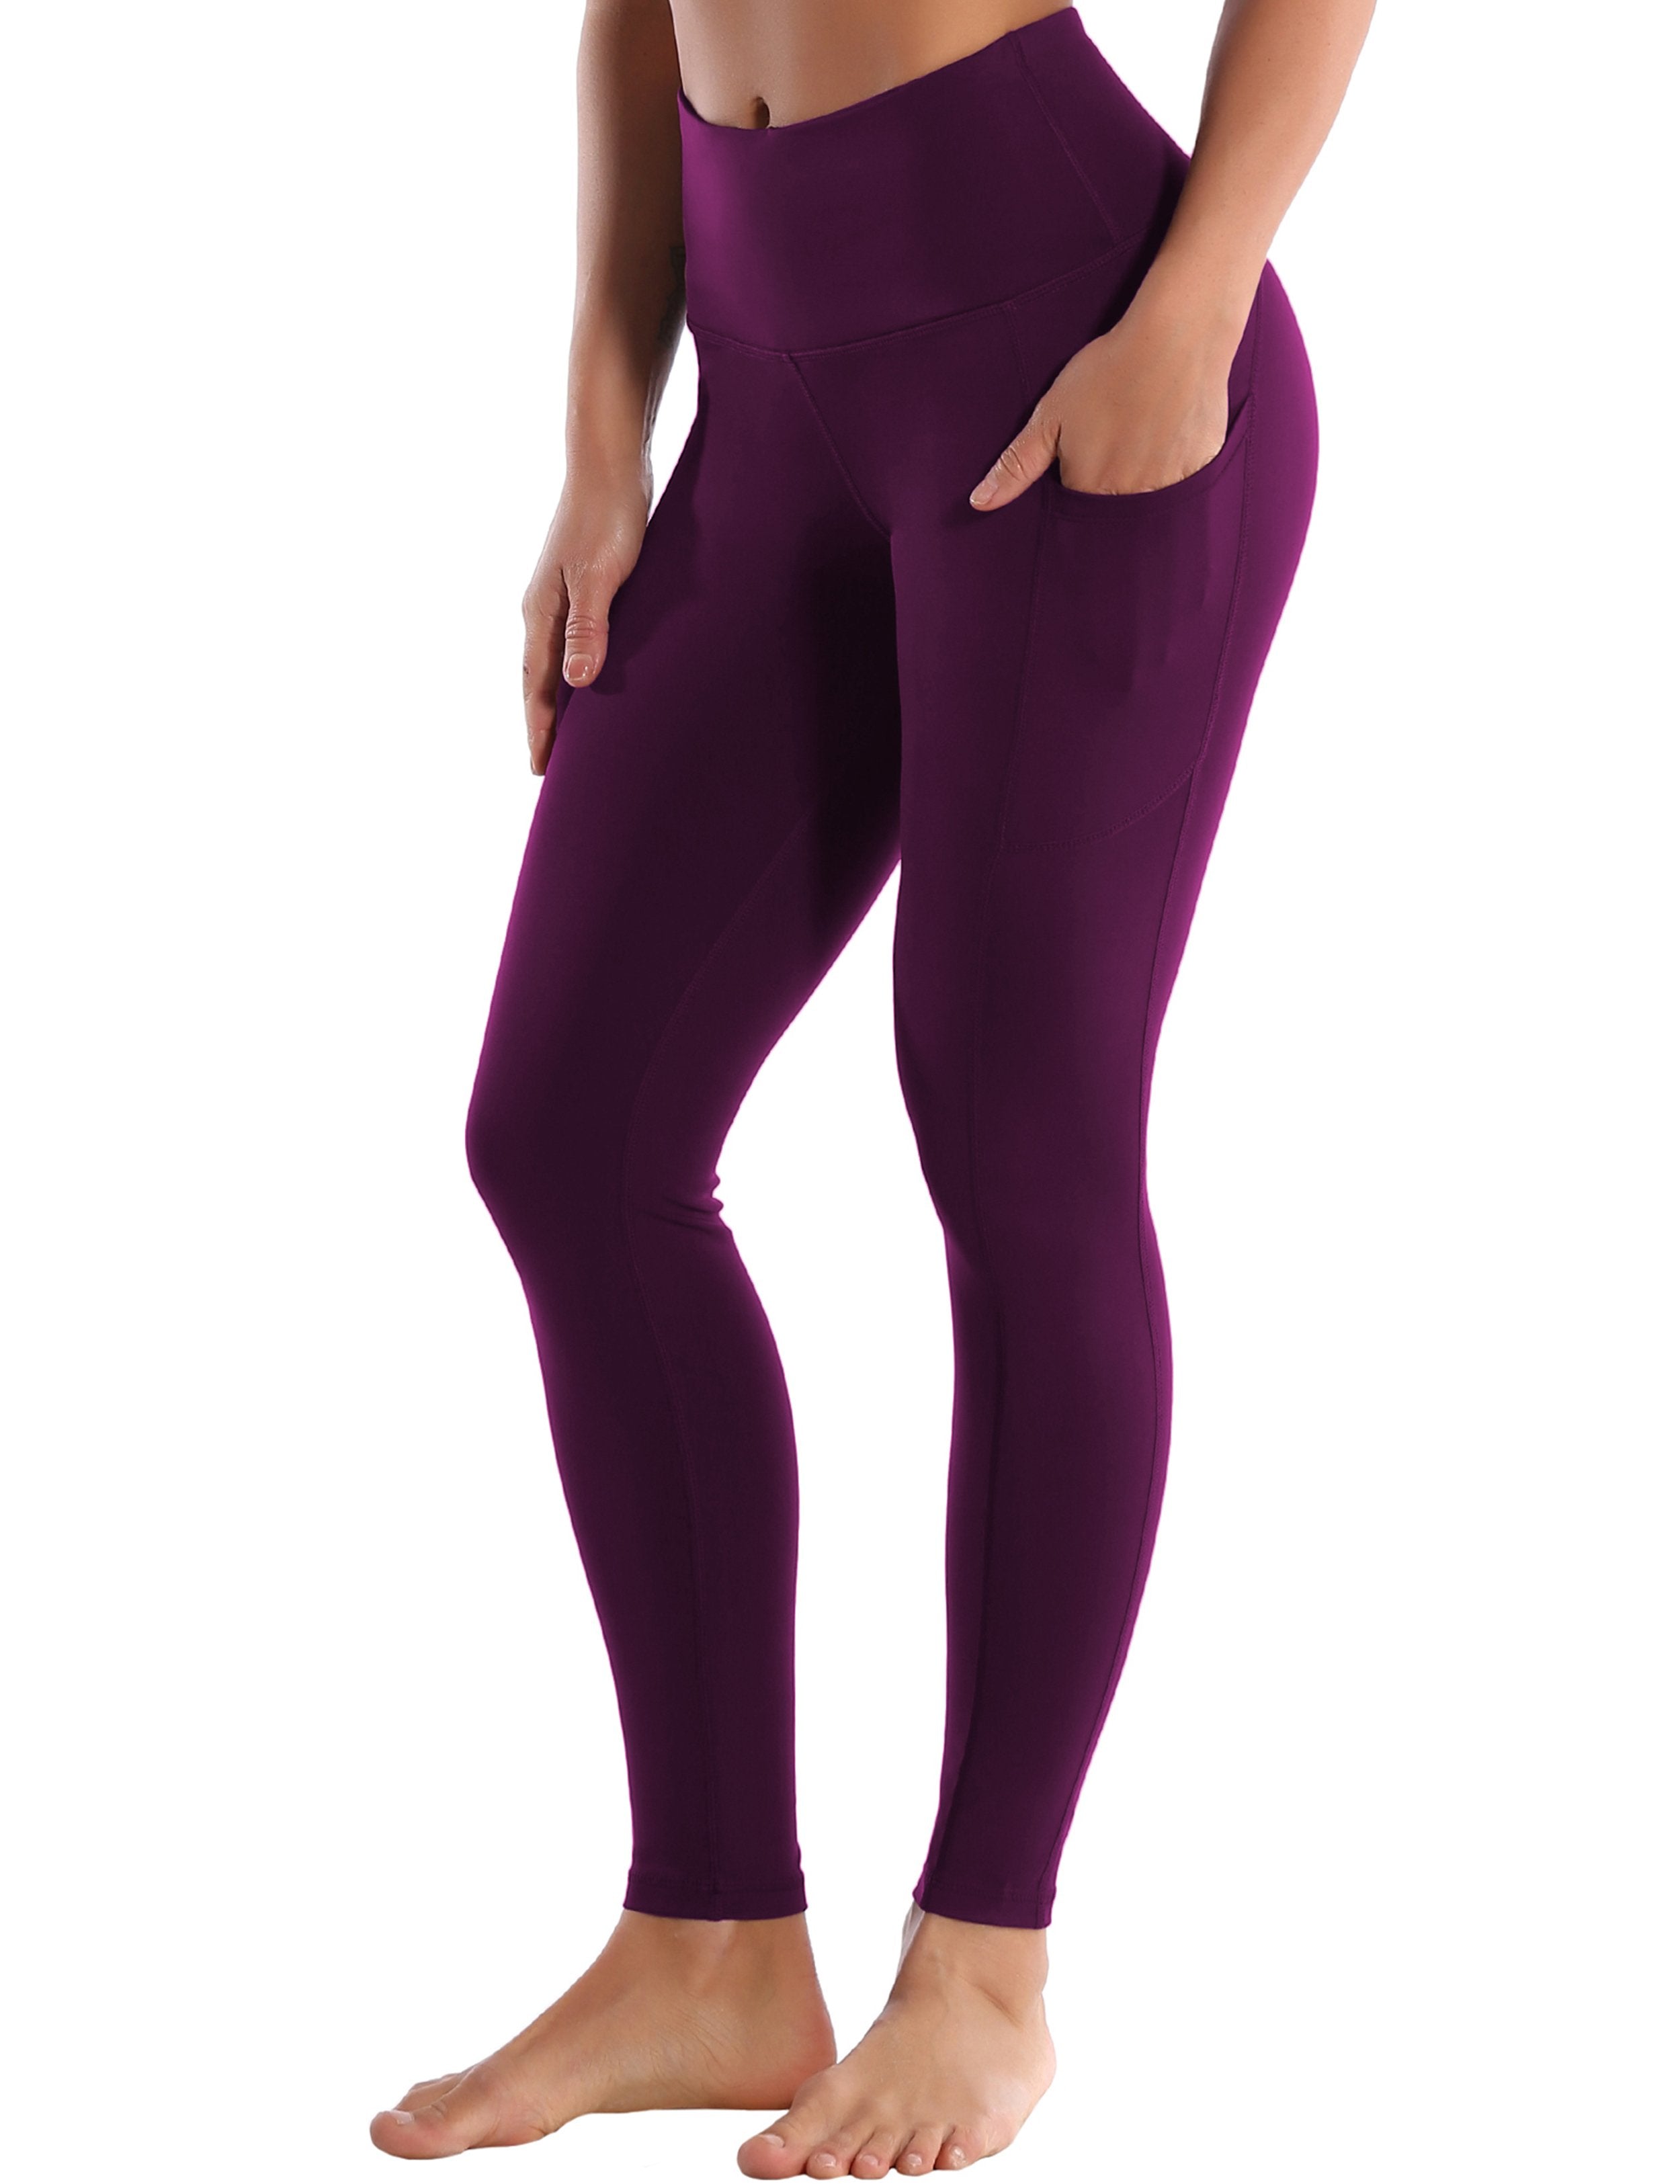 Hip Line Side Pockets Gym Pants grapevine Sexy Hip Line Side Pockets 75%Nylon/25%Spandex Fabric doesn't attract lint easily 4-way stretch No see-through Moisture-wicking Tummy control Inner pocket Two lengths